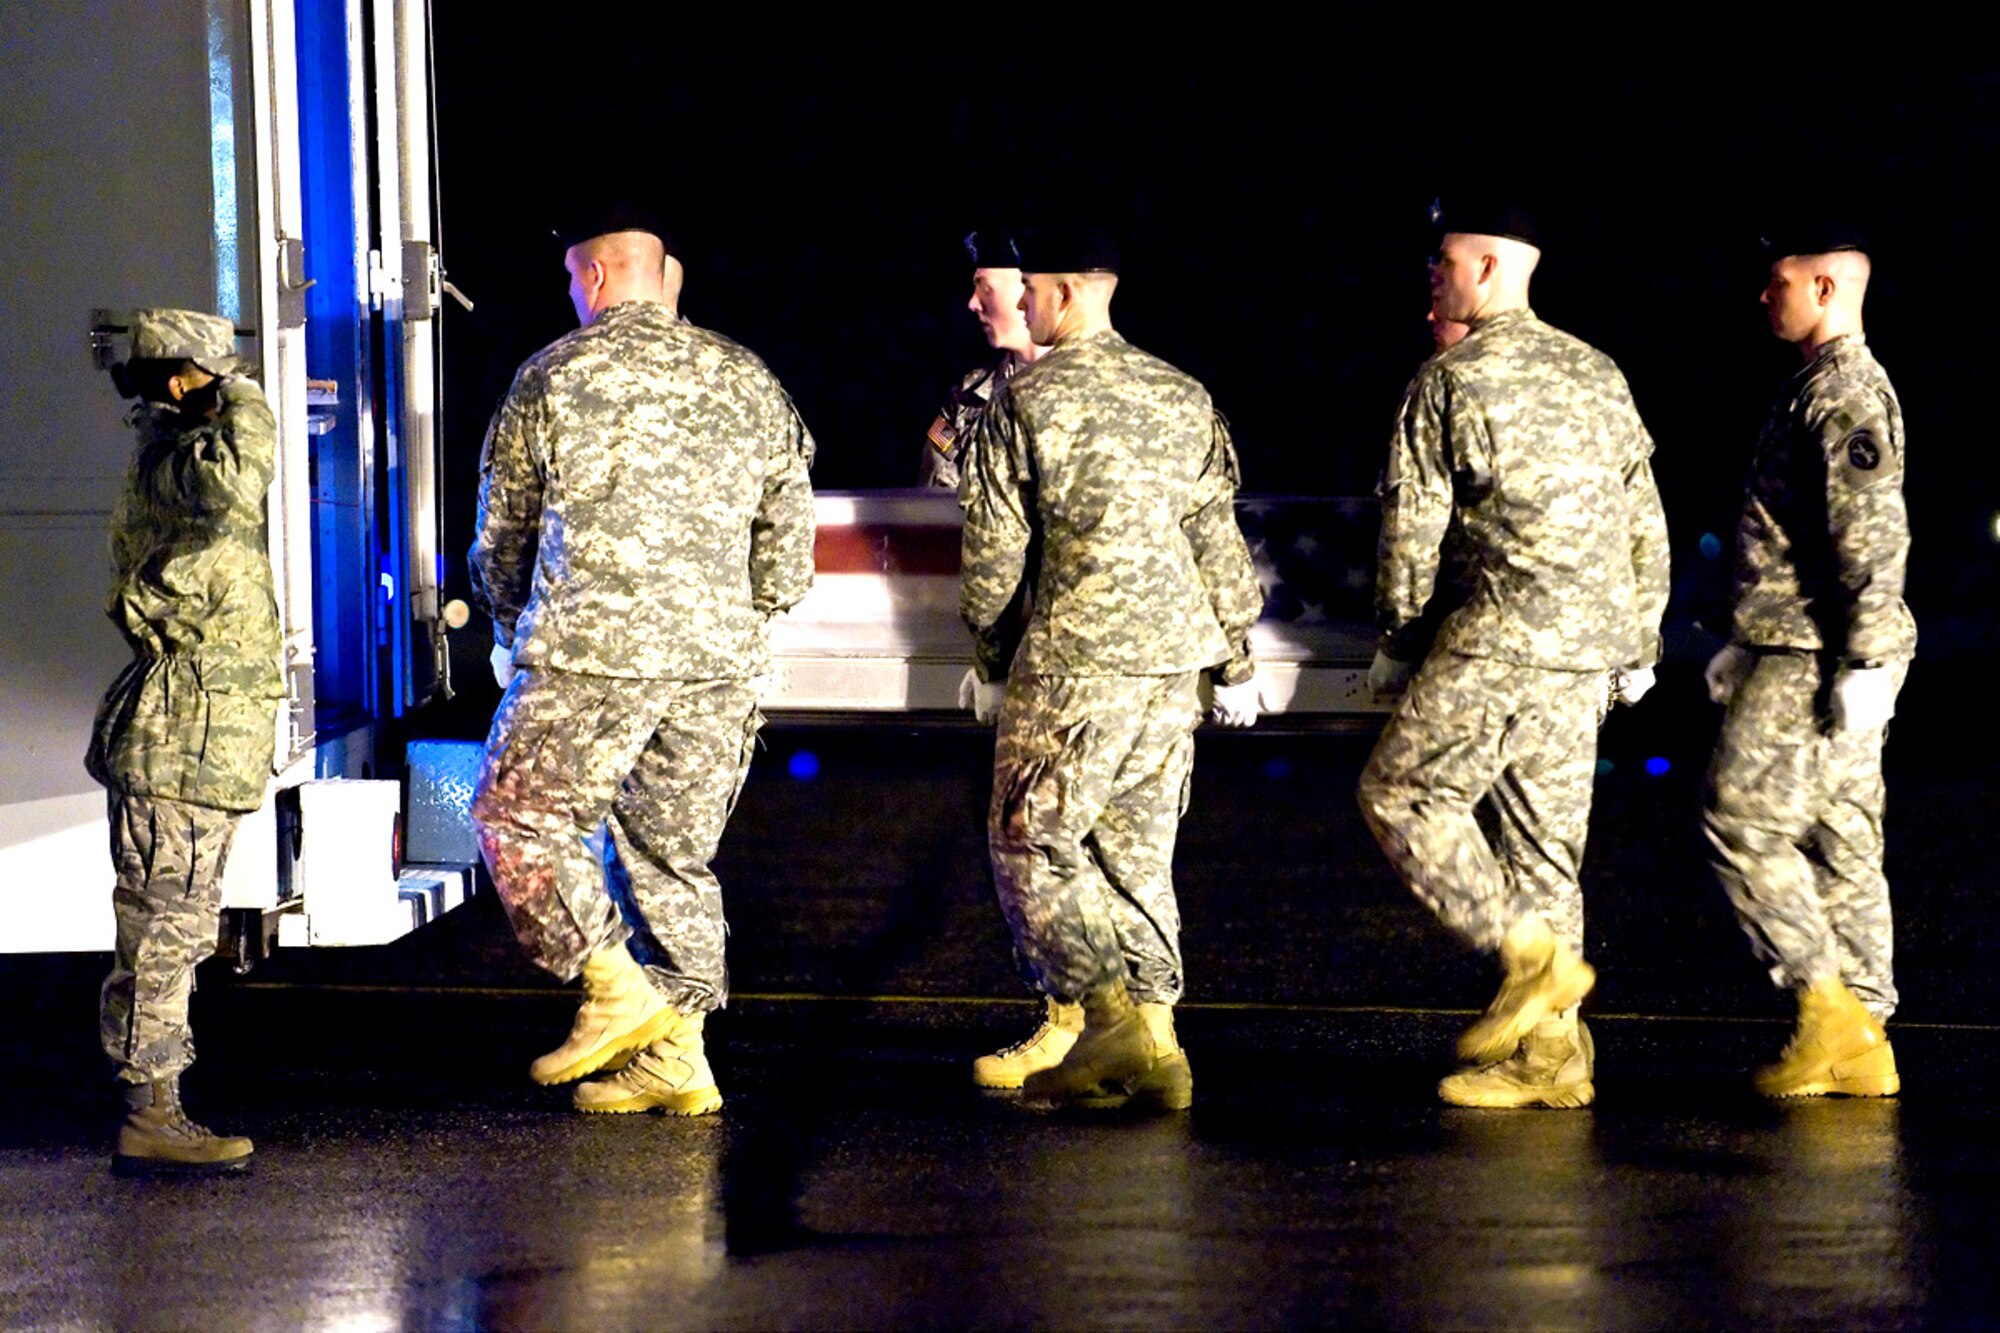 An Army carry team places a transfer case containing a fallen servicemember into a vehicle during a “dignified transfer” at Dover Air Force Base, Del., Feb. 22.. The vehicle will transport the case to the Air Force Mortuary Affairs Operations Center, where all U.S. servicemembers killed in combat are prepared for burial. (U.S. Air Force photo/Roland Balik) 